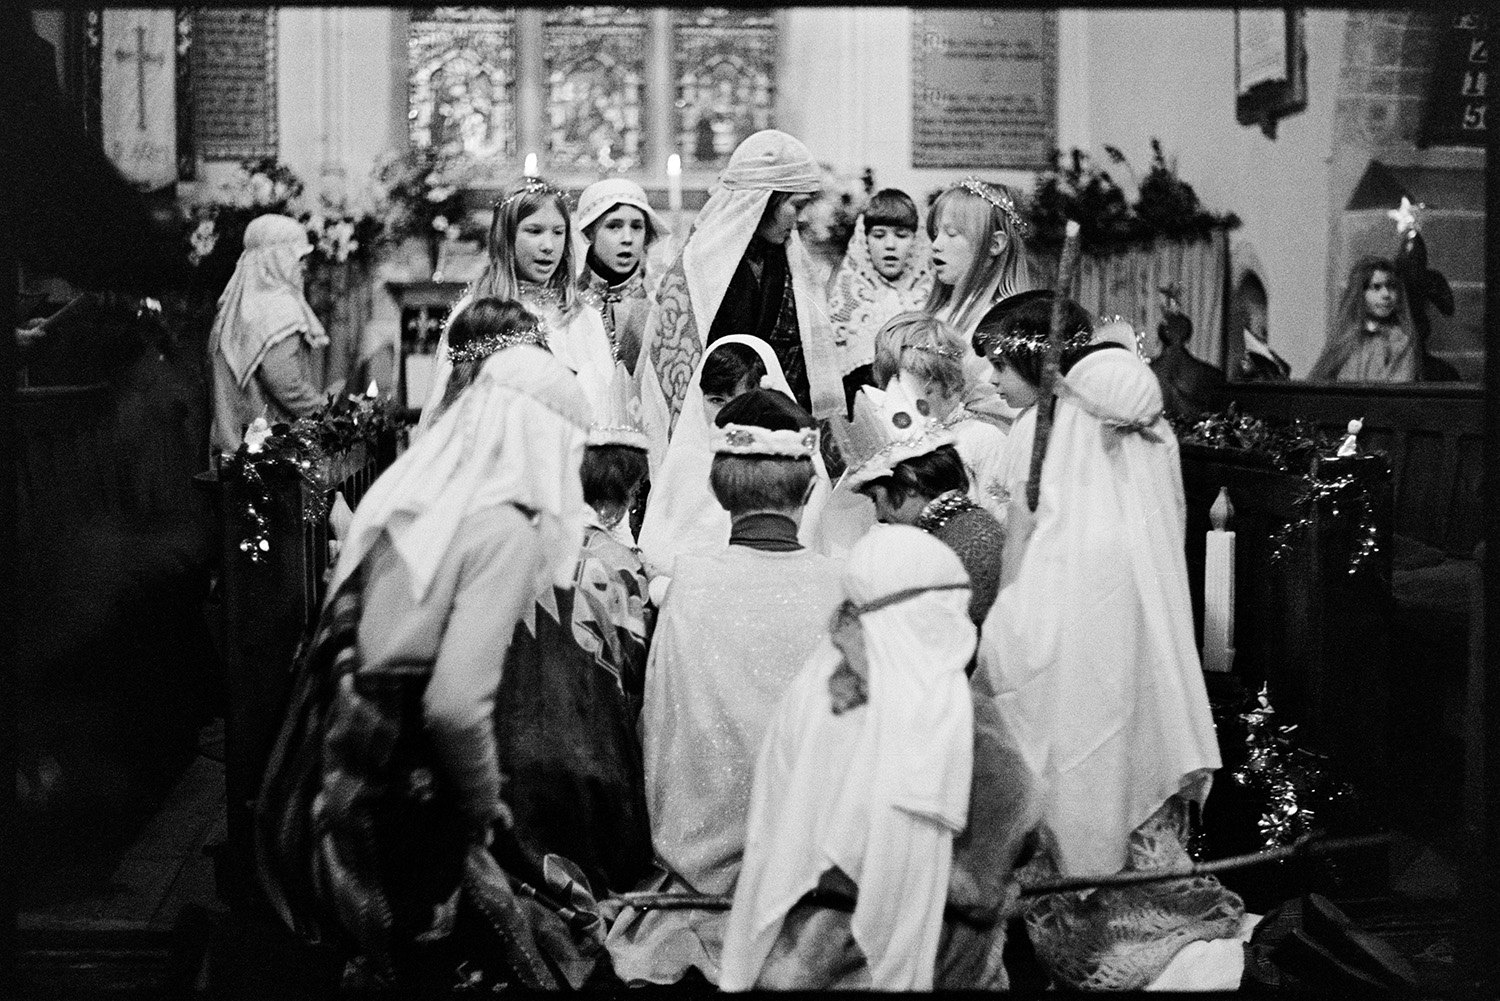 Children at Christmas Nativity play in Church. 
[Children performing in a nativity play in Dolton Church. They are dressed as angels, kings and shepherds. The pews are decorated for Christmas with tinsel.]